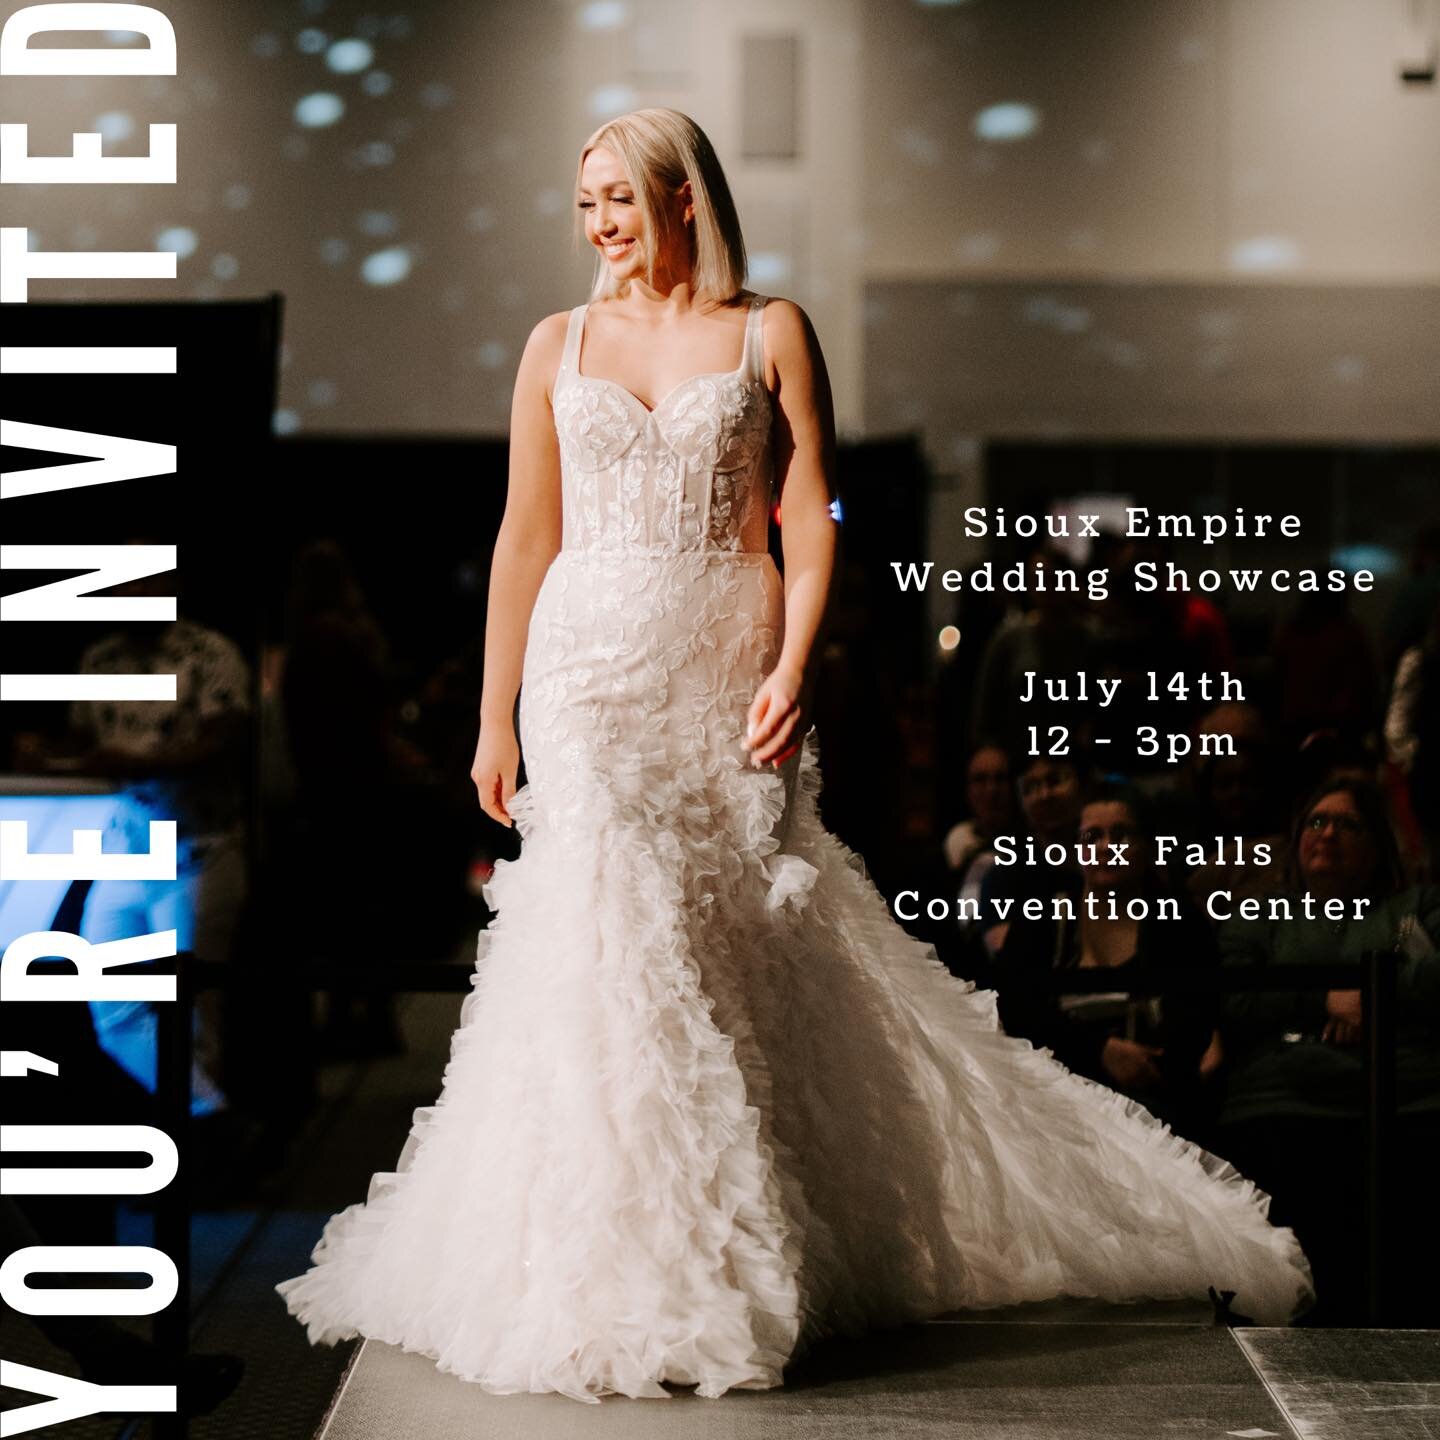 Come visit with over 100+ booths at the Denny Sanford Premier Sioux Falls Convention Center on July 14, 2024 for the Summer Sioux Empire Empire Wedding Showcase! Pre-register now to WIN FREE tickets 🎫 and thousands in Gift Certificates towards your 